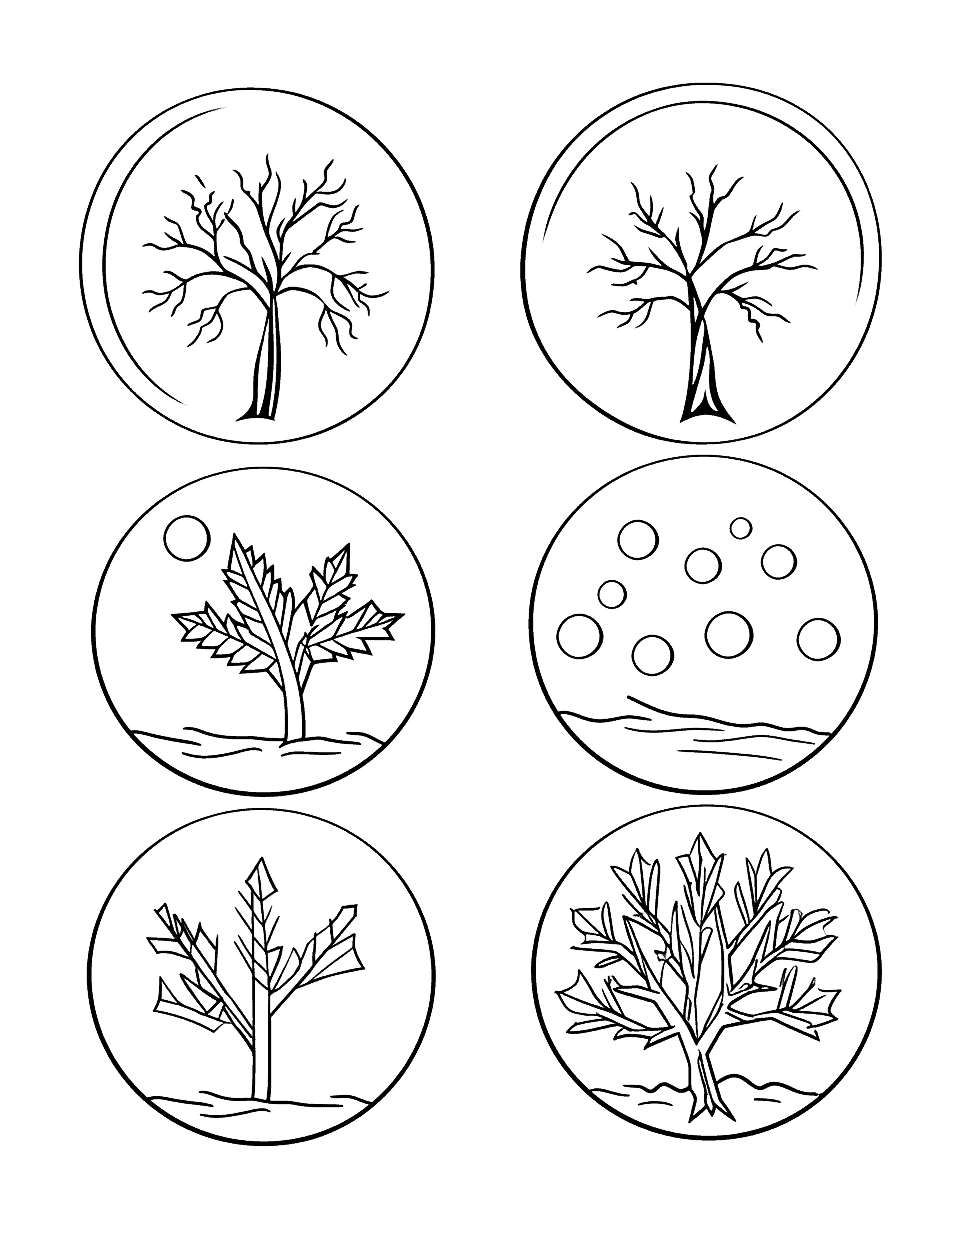 Four Seasons for Toddlers Fall Coloring Page - A simple depiction of the four seasons, with an emphasis on the colorful fall.